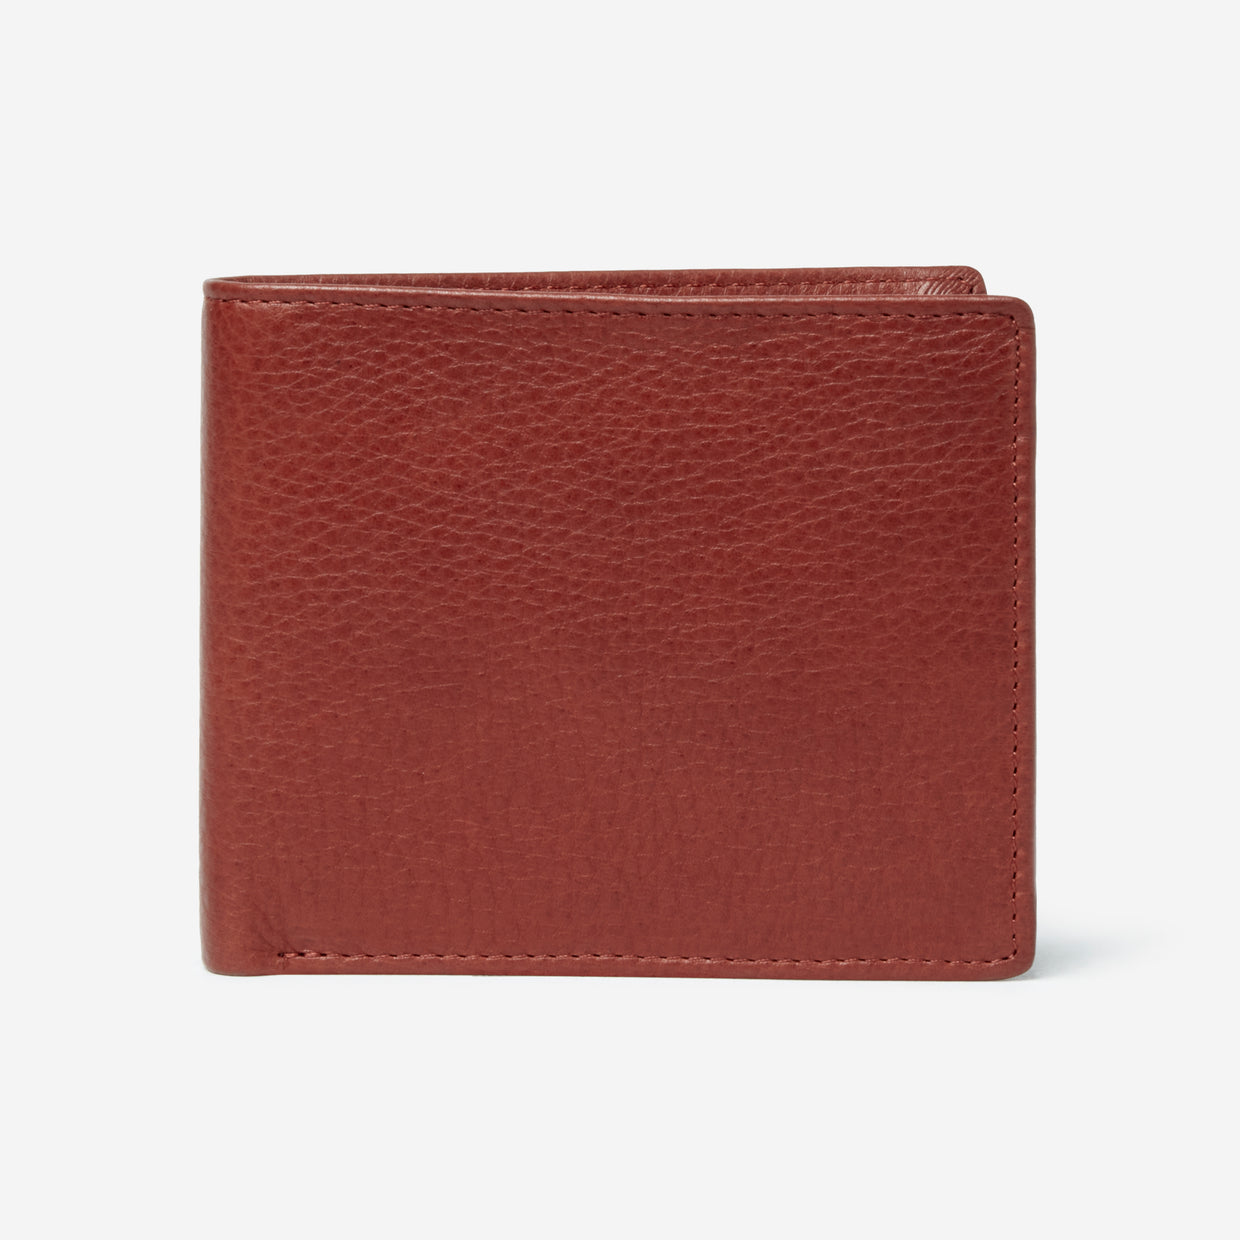 Osgoode Marley RFID Magnetic Money Clip and Card Holder